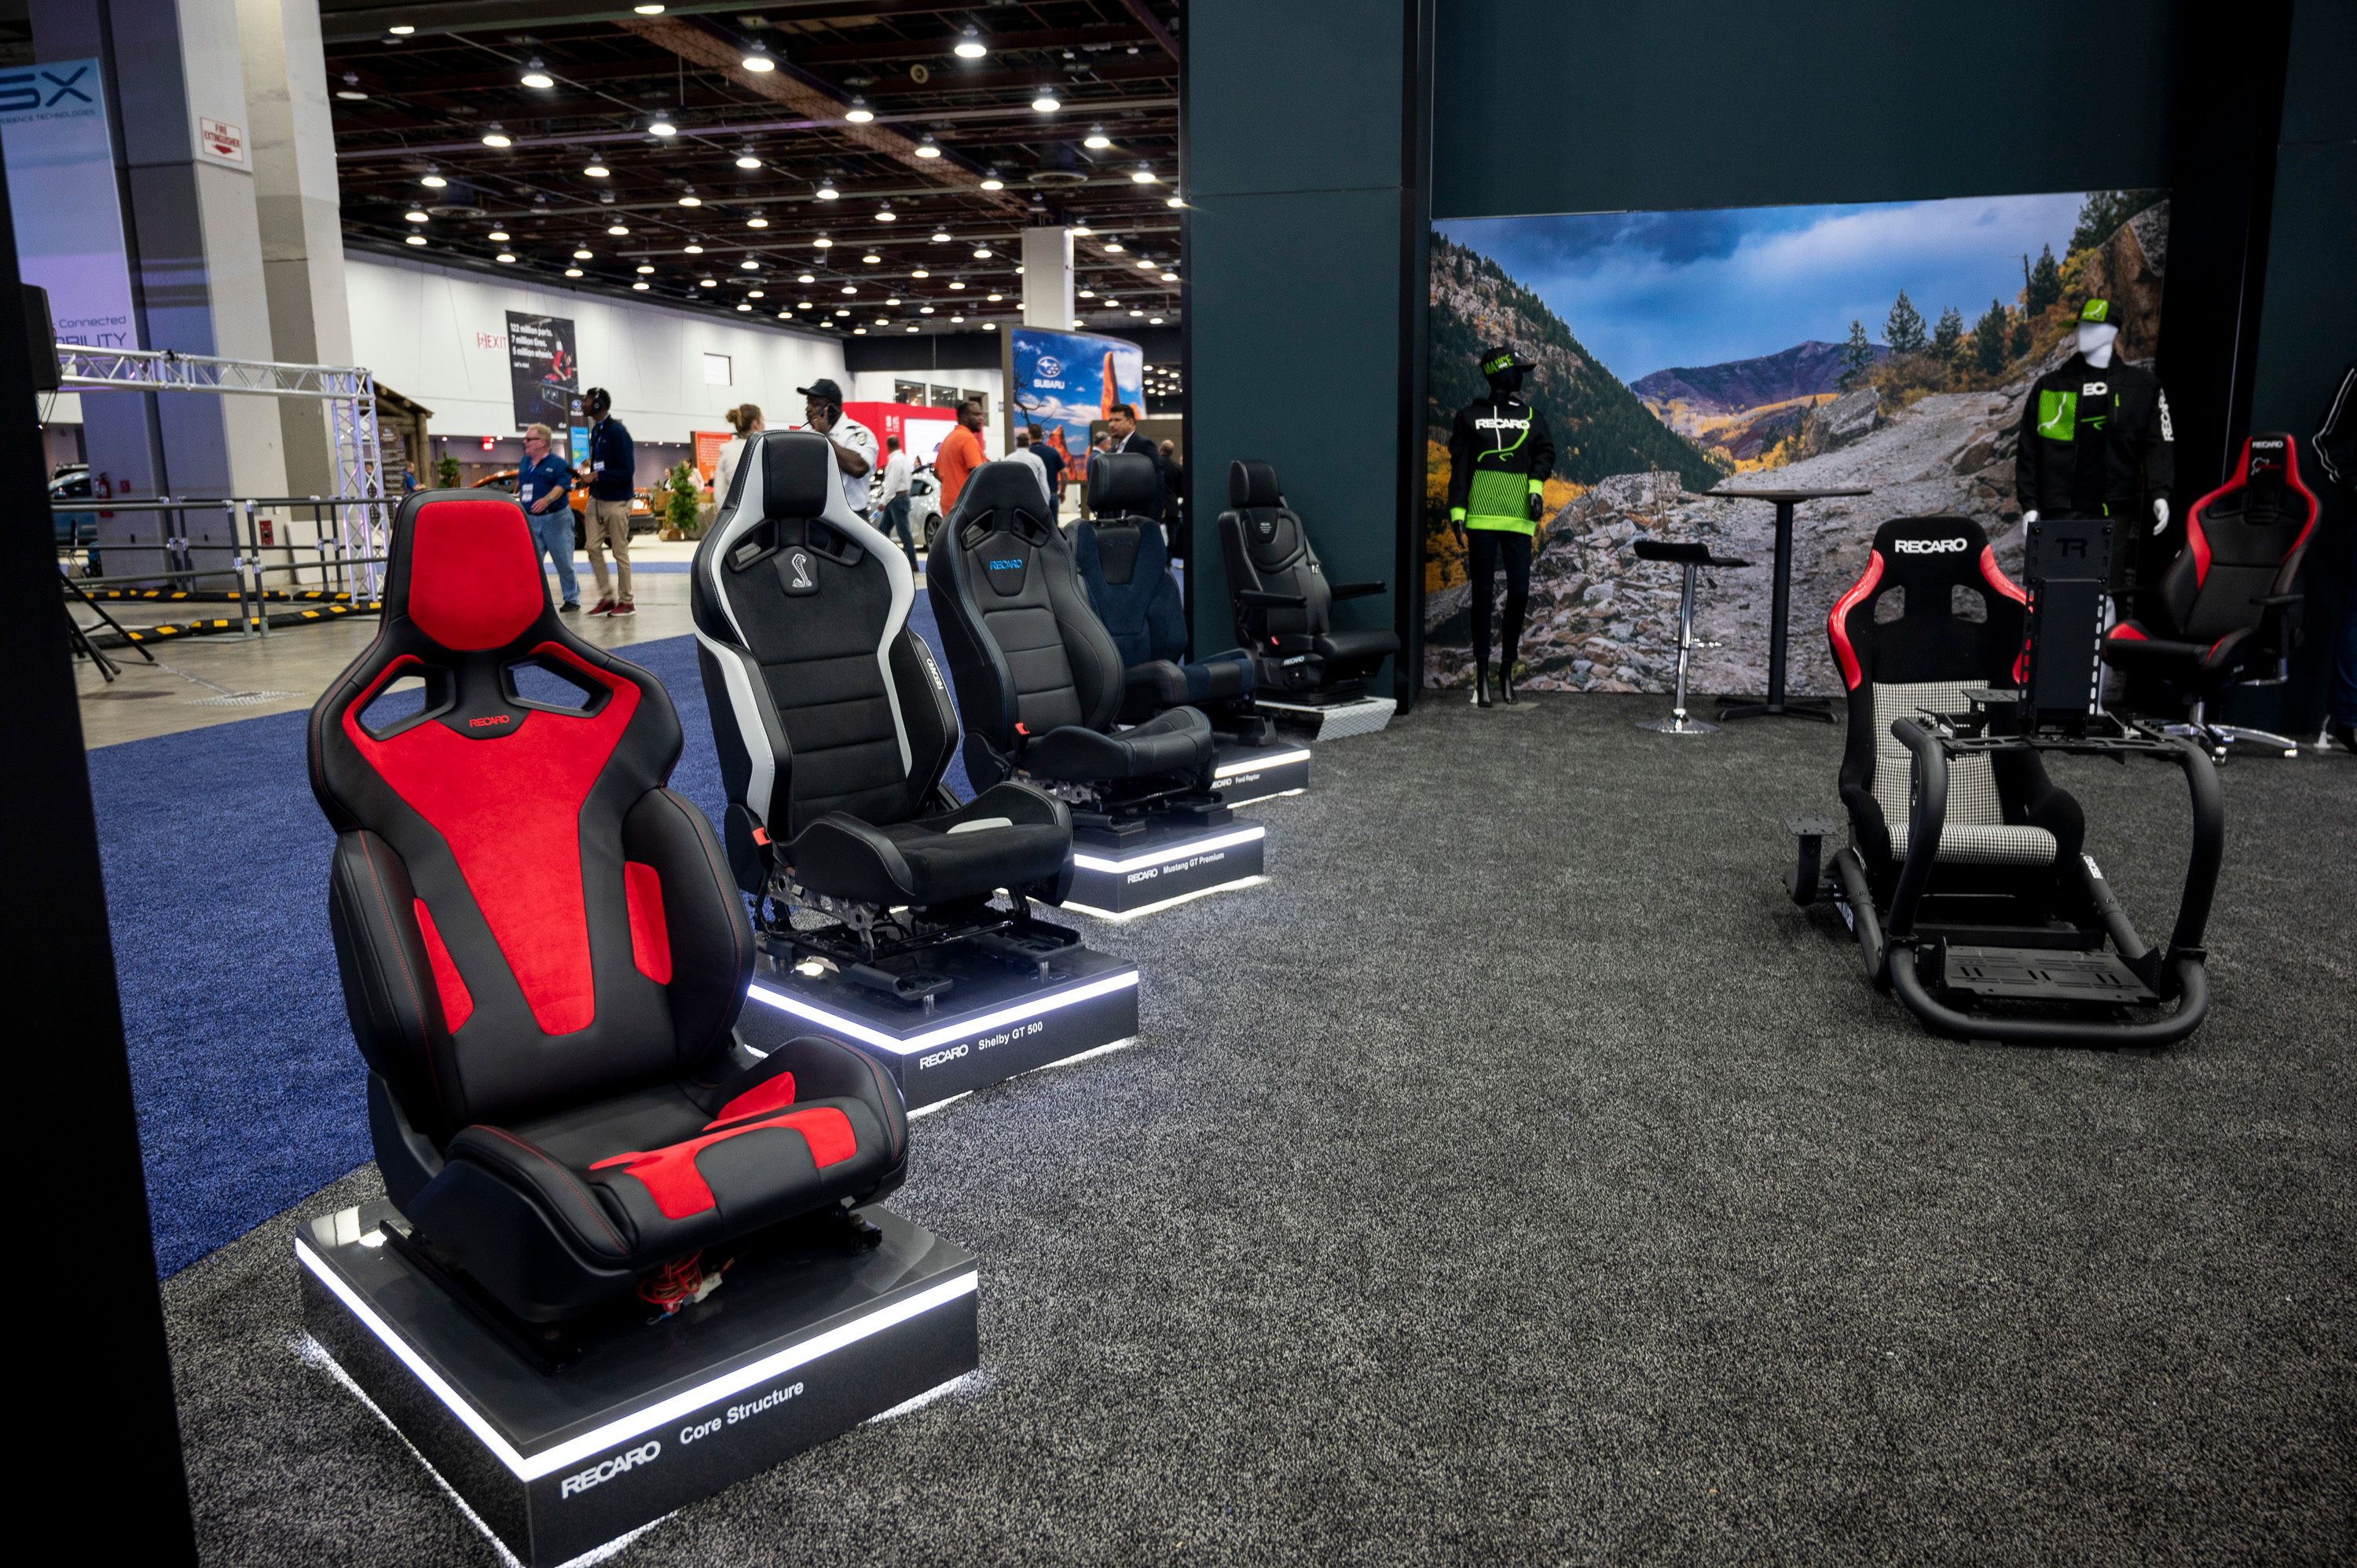 Recaro seats on display during the 2022 North American International Auto Show at Huntington Place in Detroit on Wednesday, Sept. 14 2022.